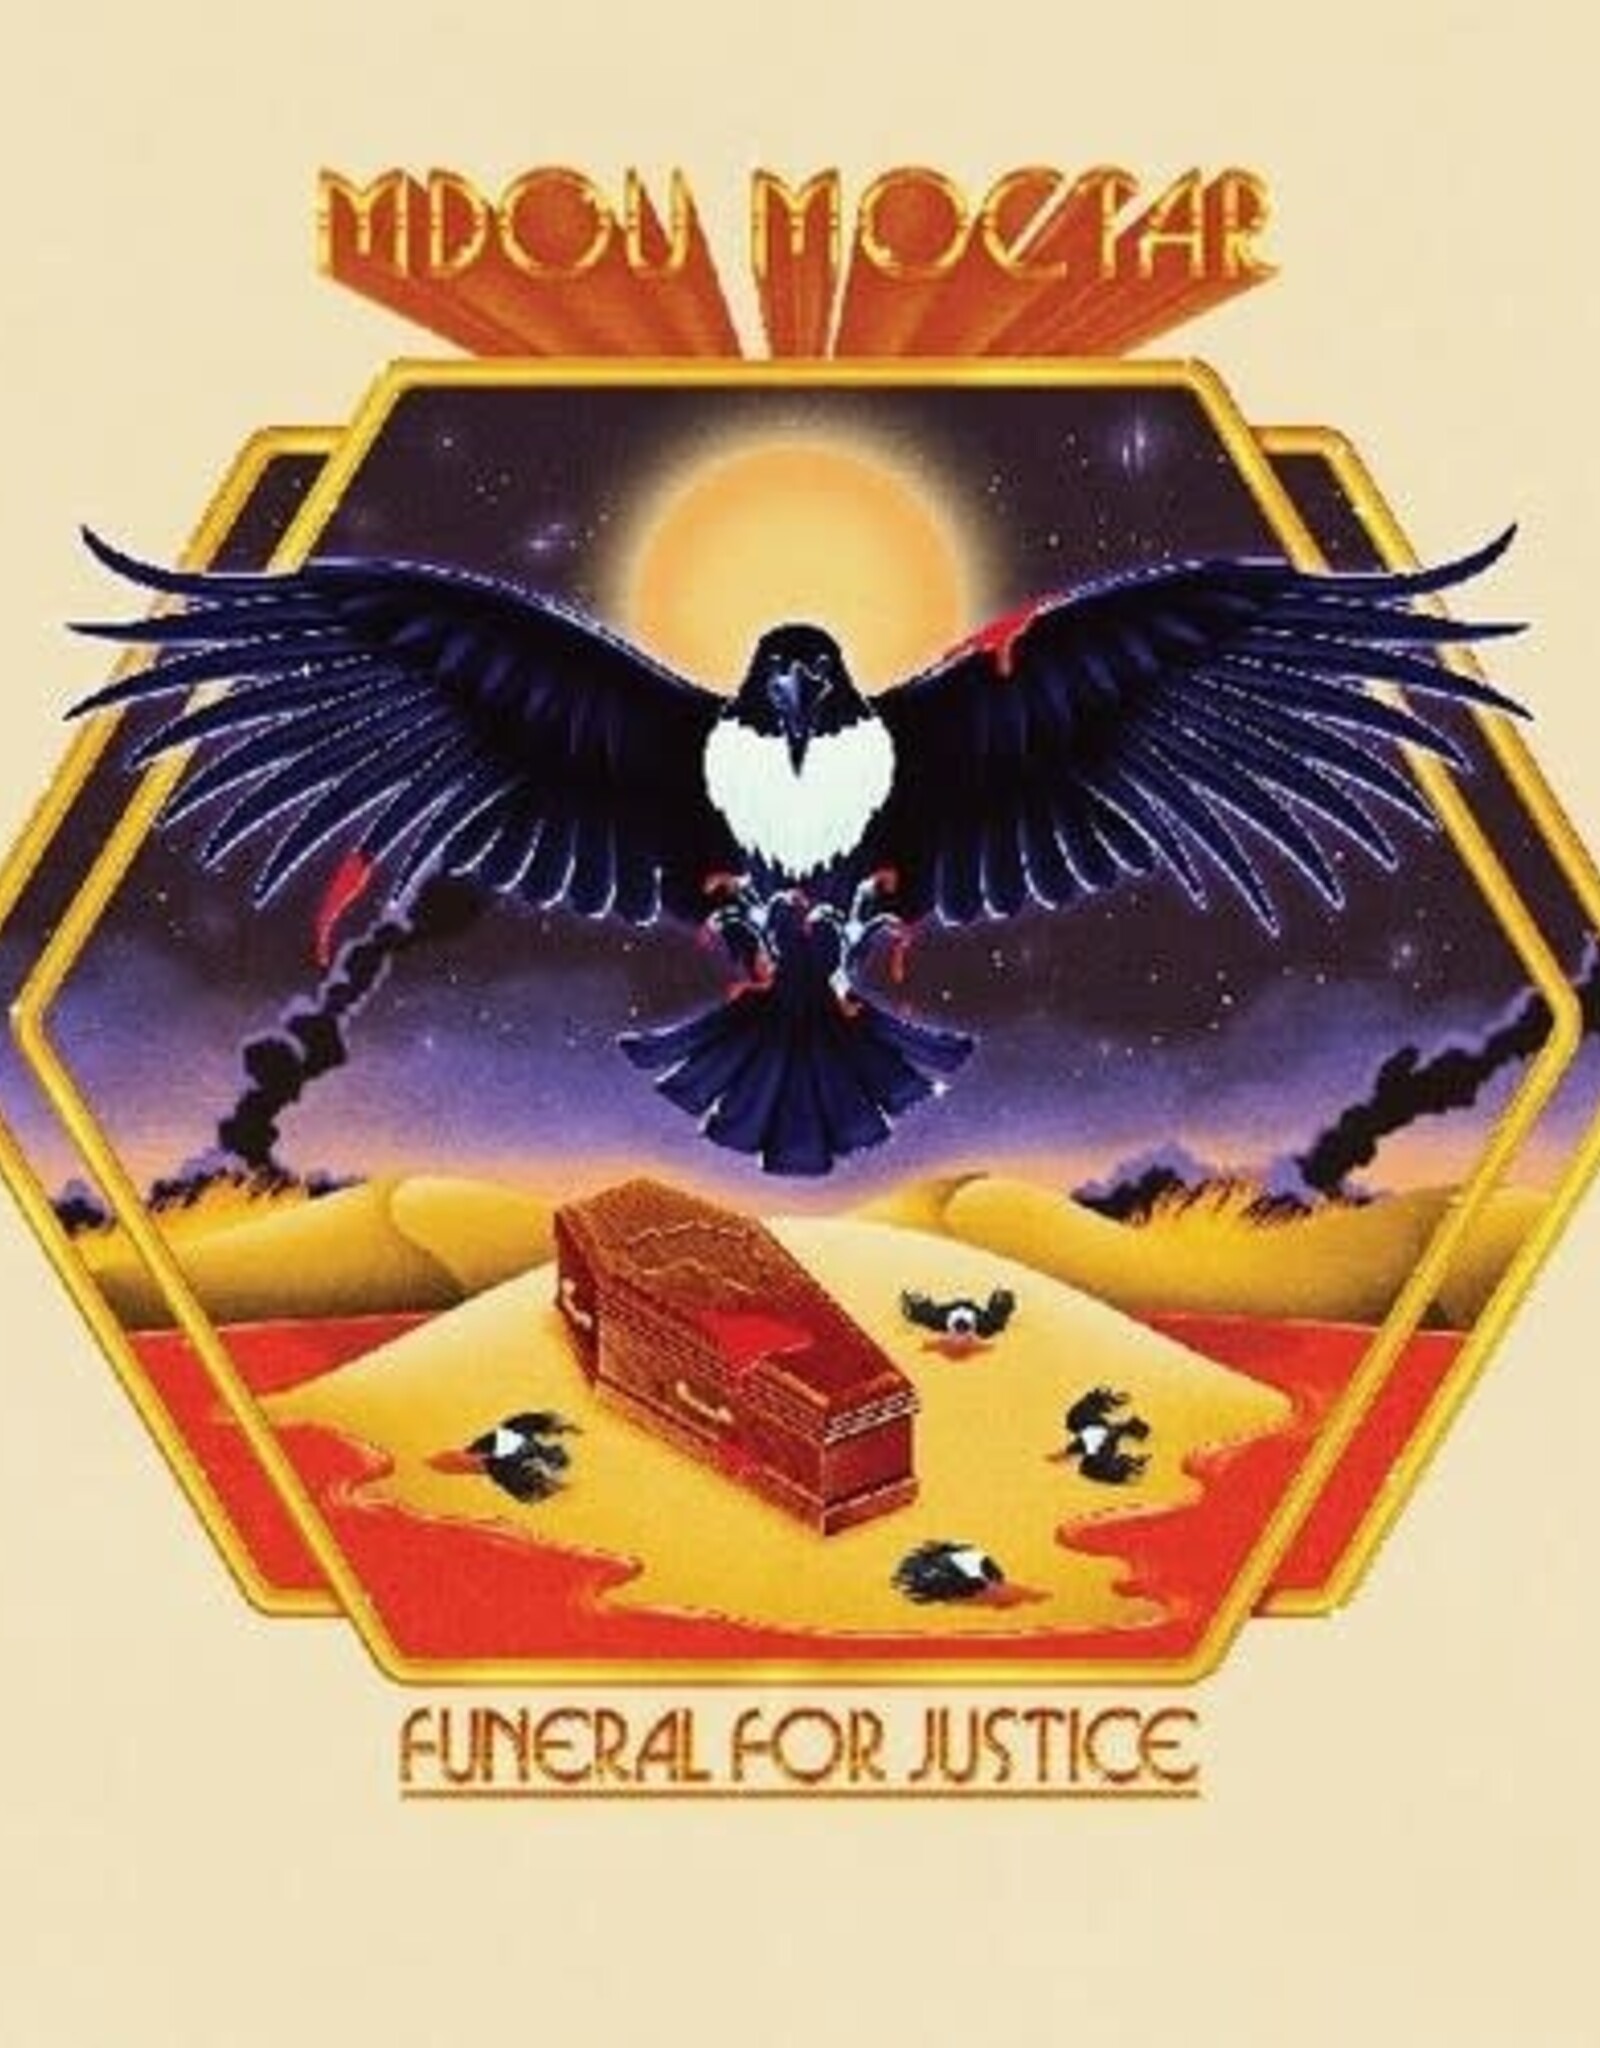 Mdou Moctar - Funeral For Justice